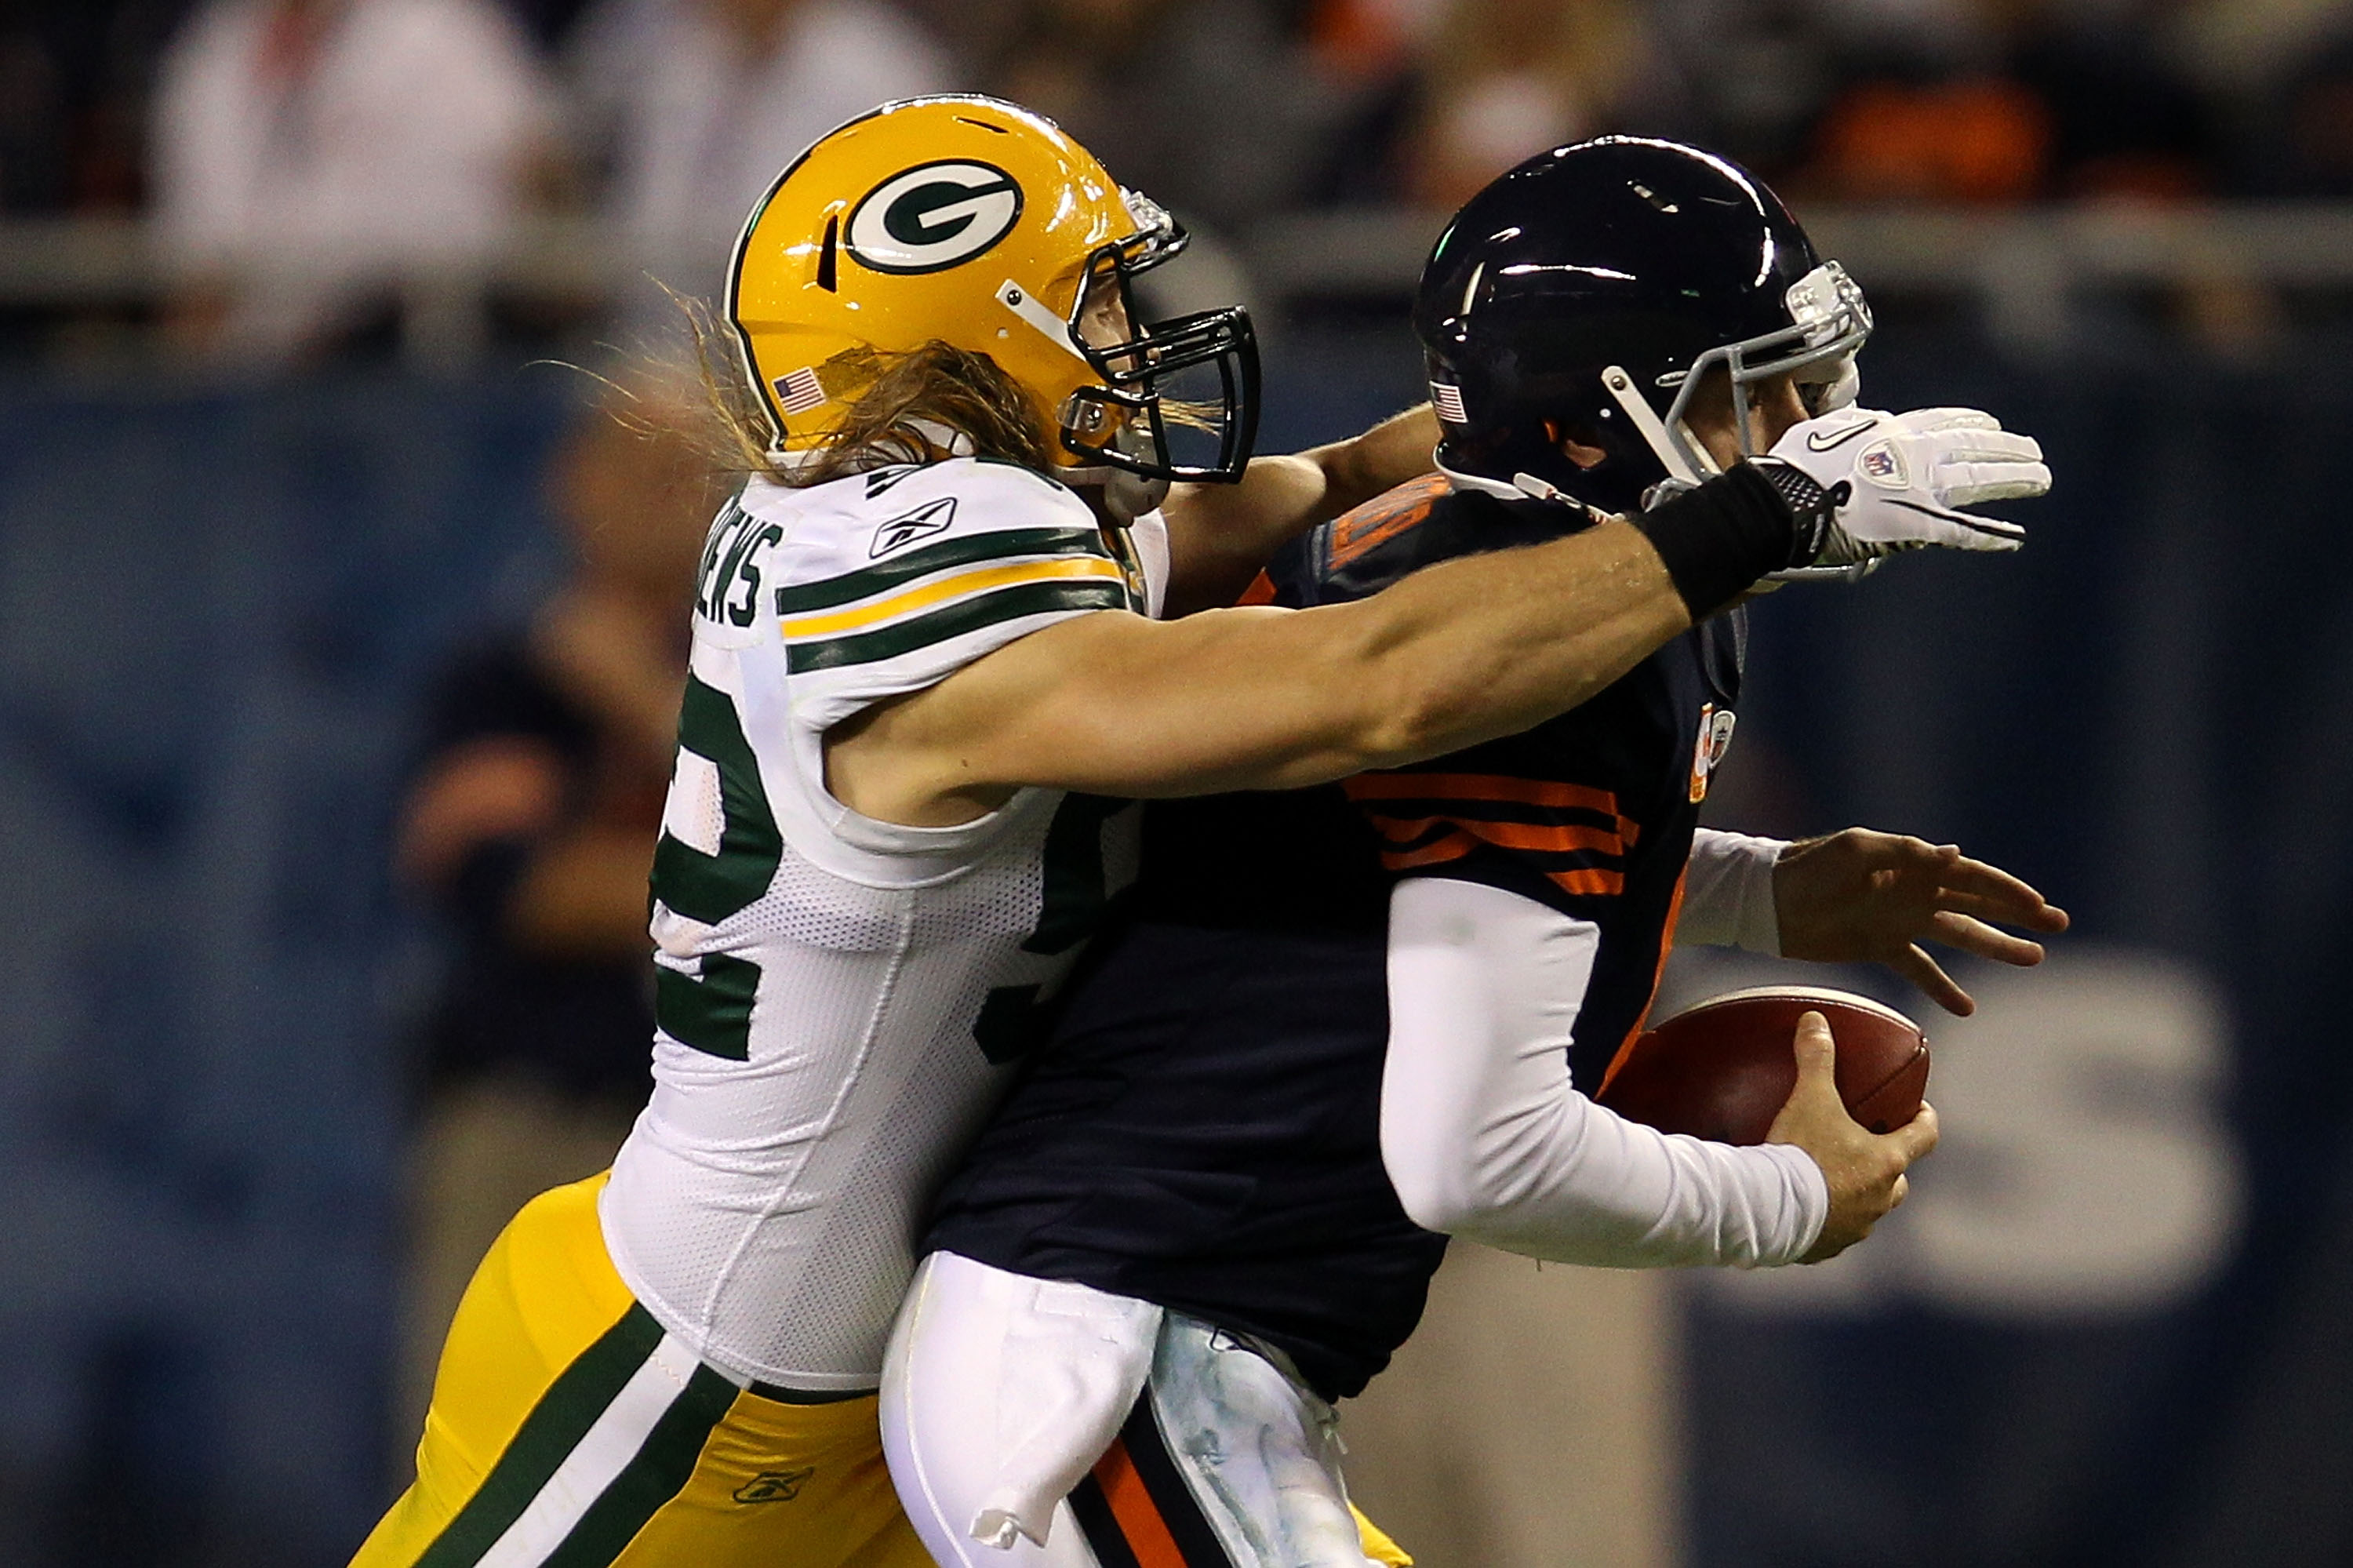 CHICAGO - SEPTEMBER 27:  Clay Matthews #52 of the Green Bay Packers is called for a facemask as he pulls down Jay Cutler #6 of the Chicago Bears in the first quarter at Soldier Field on September 27, 2010 in Chicago, Illinois.  (Photo by Jonathan Daniel/G